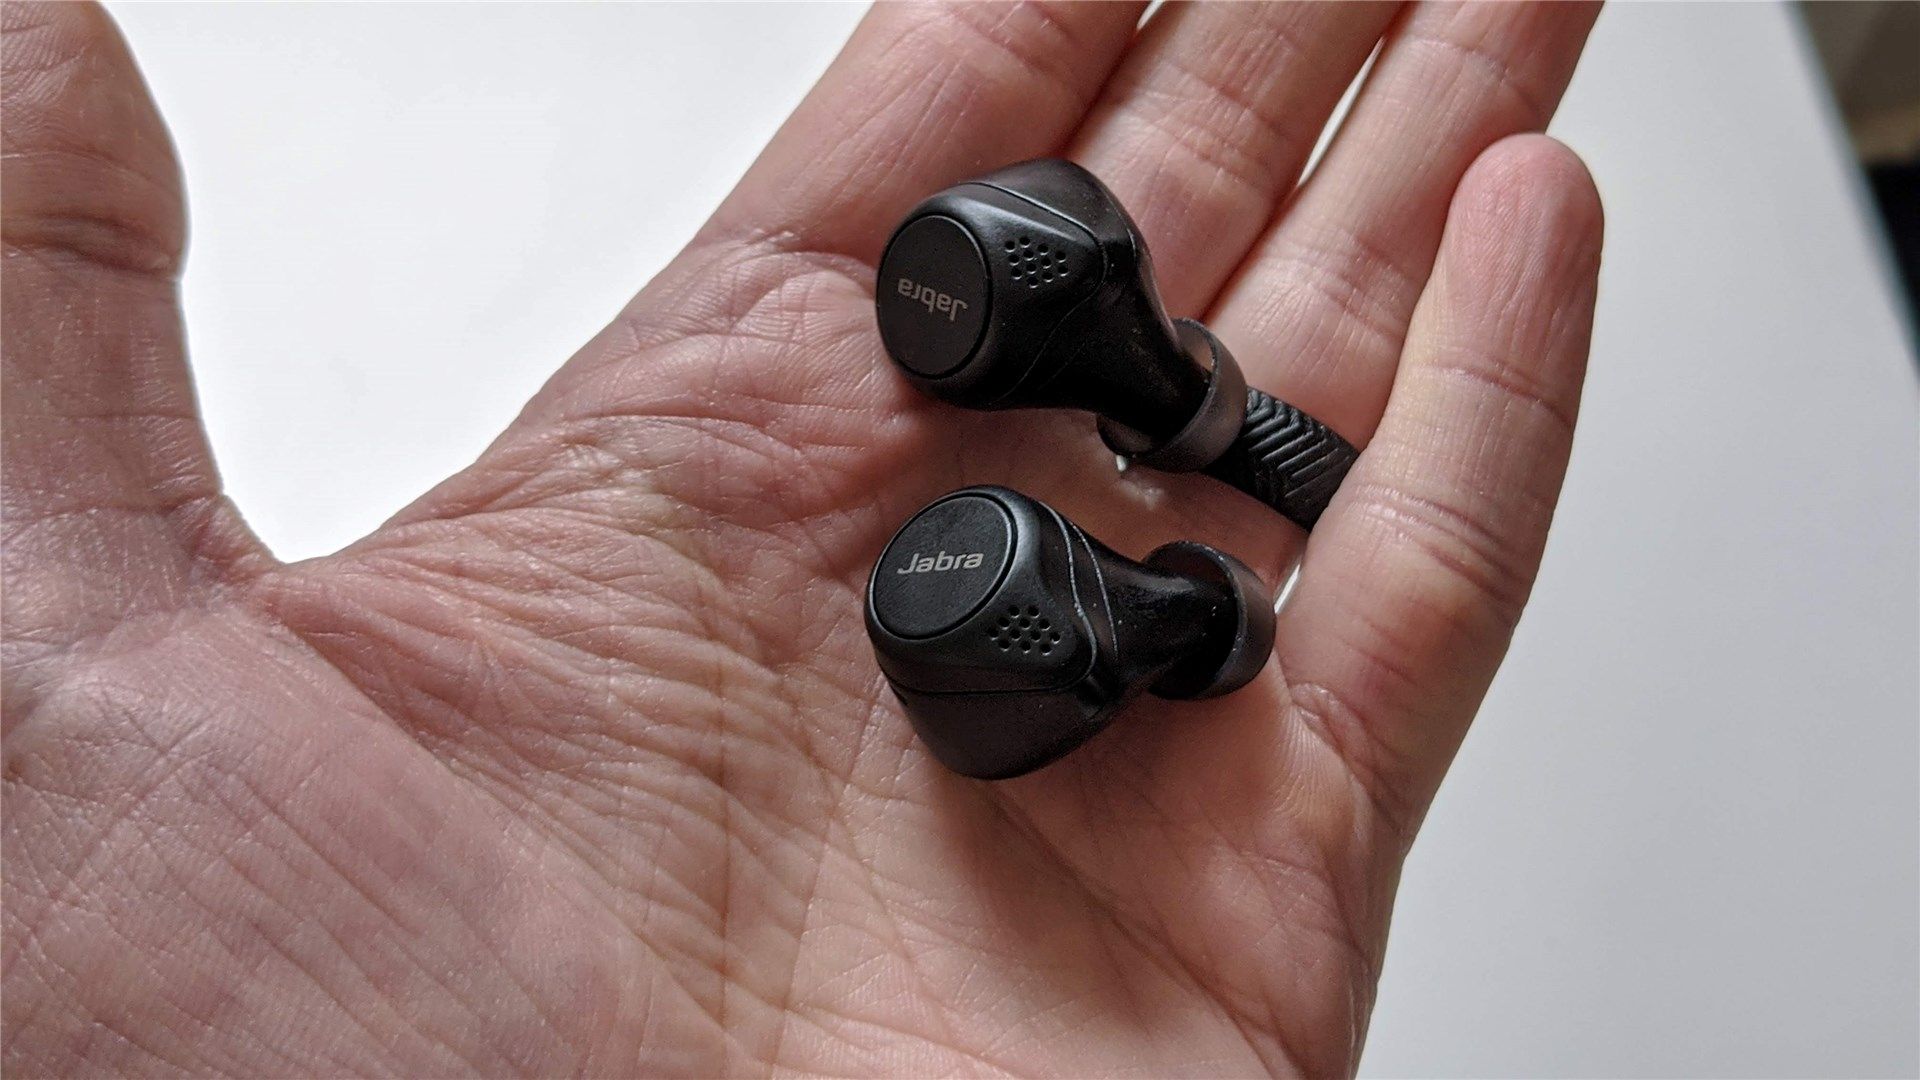 The Jabra Elite 75t in the palm of a hand